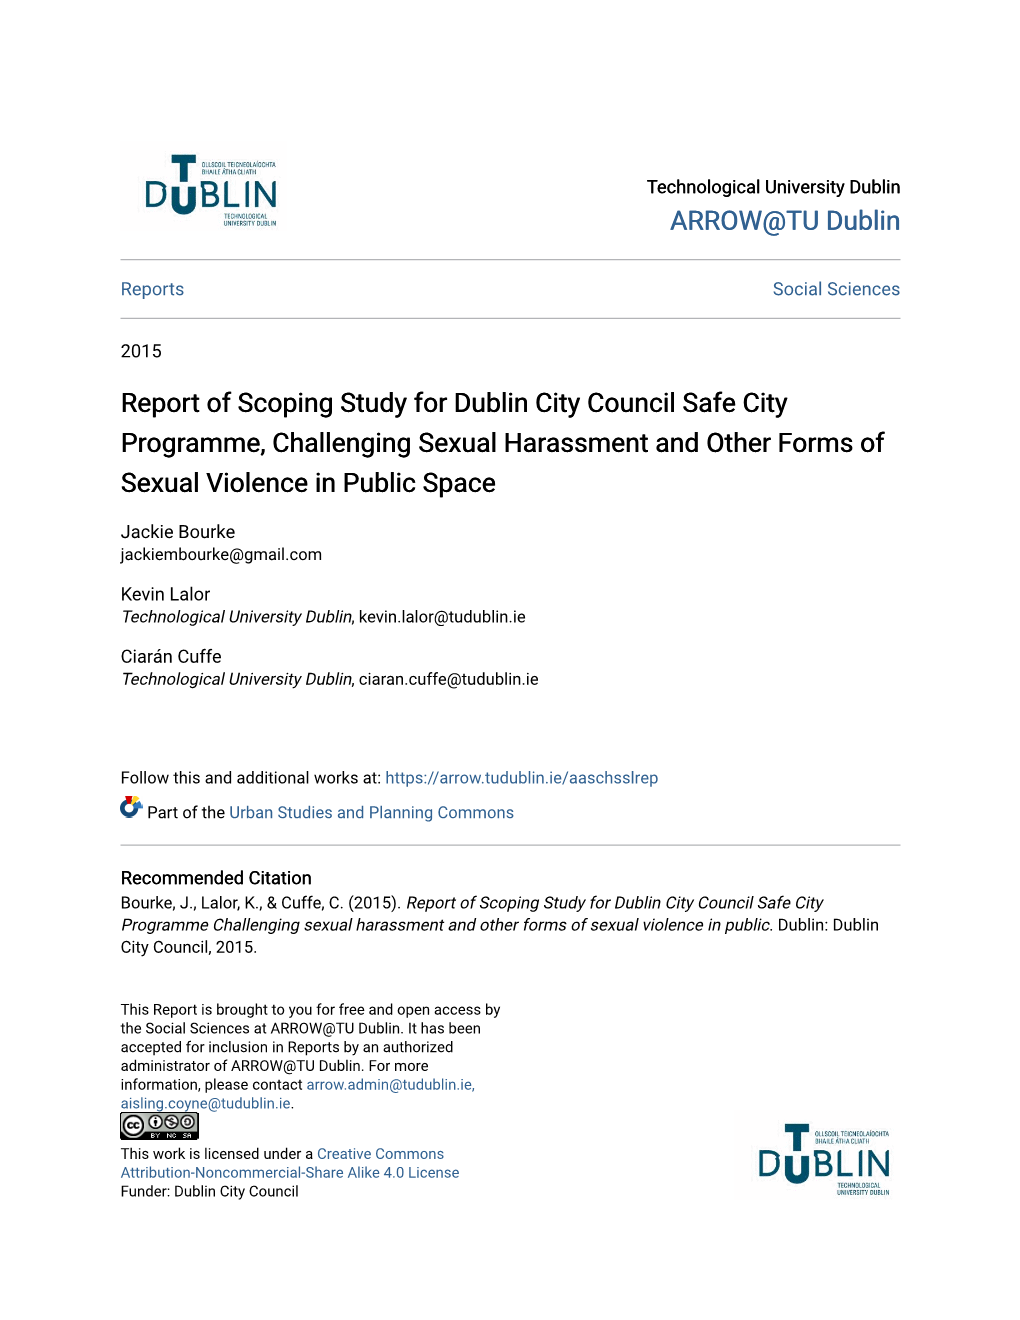 Report of Scoping Study for Dublin City Council Safe City Programme, Challenging Sexual Harassment and Other Forms of Sexual Violence in Public Space